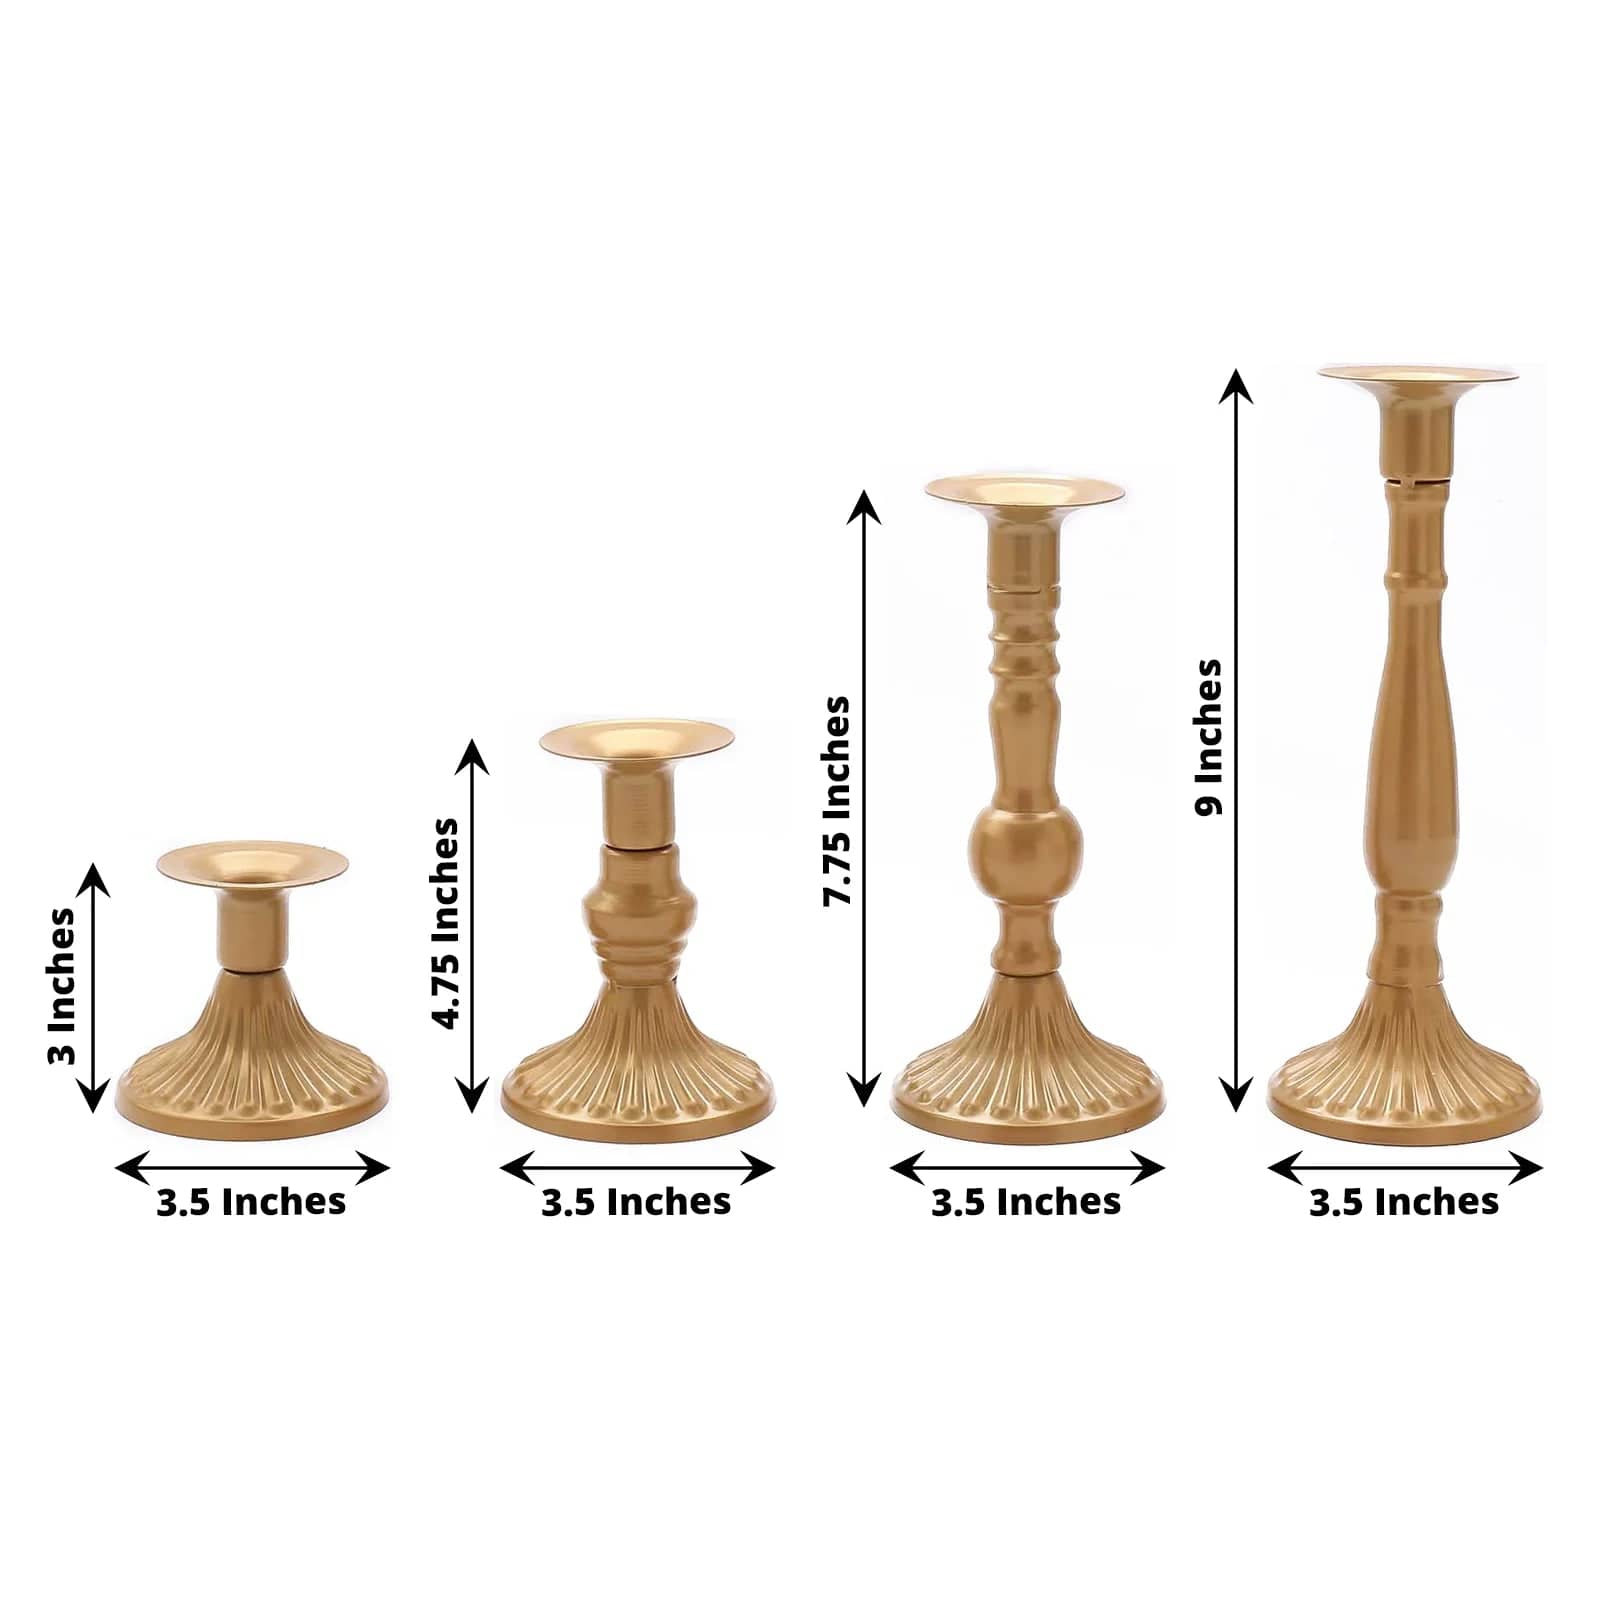 4 Gold Candlestick Stands Baroque Design Taper Candle Holders Set